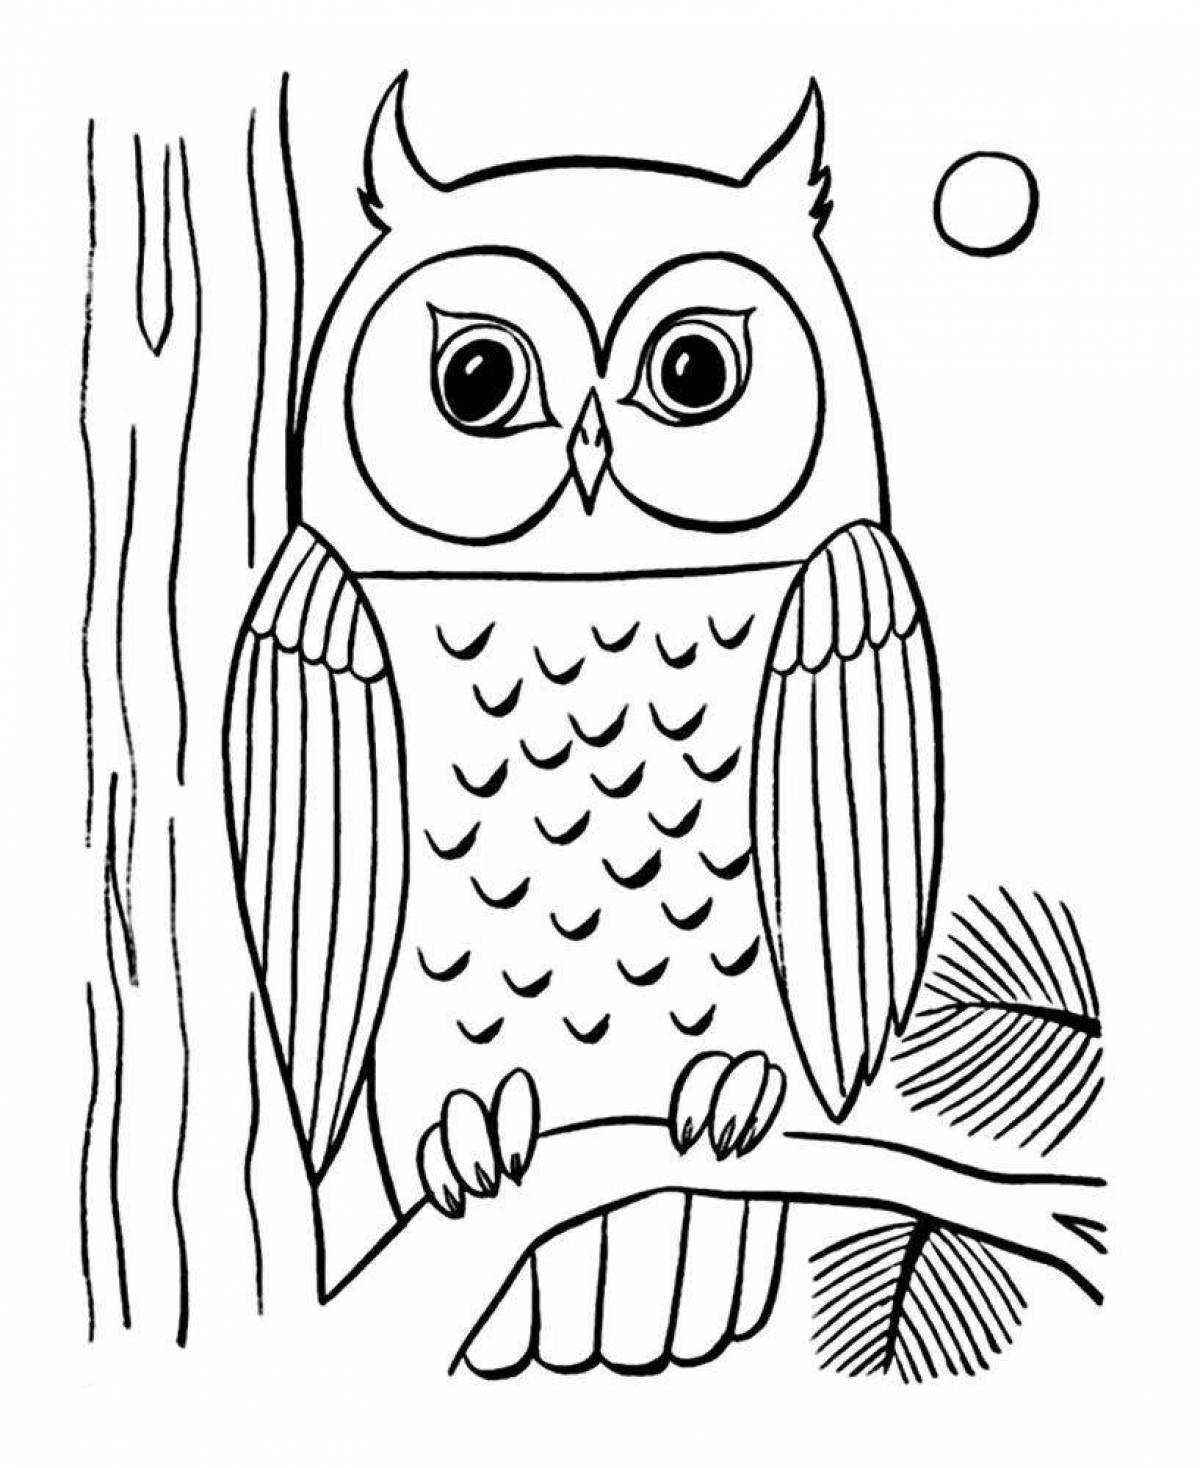 Bright coloring drawing of an owl